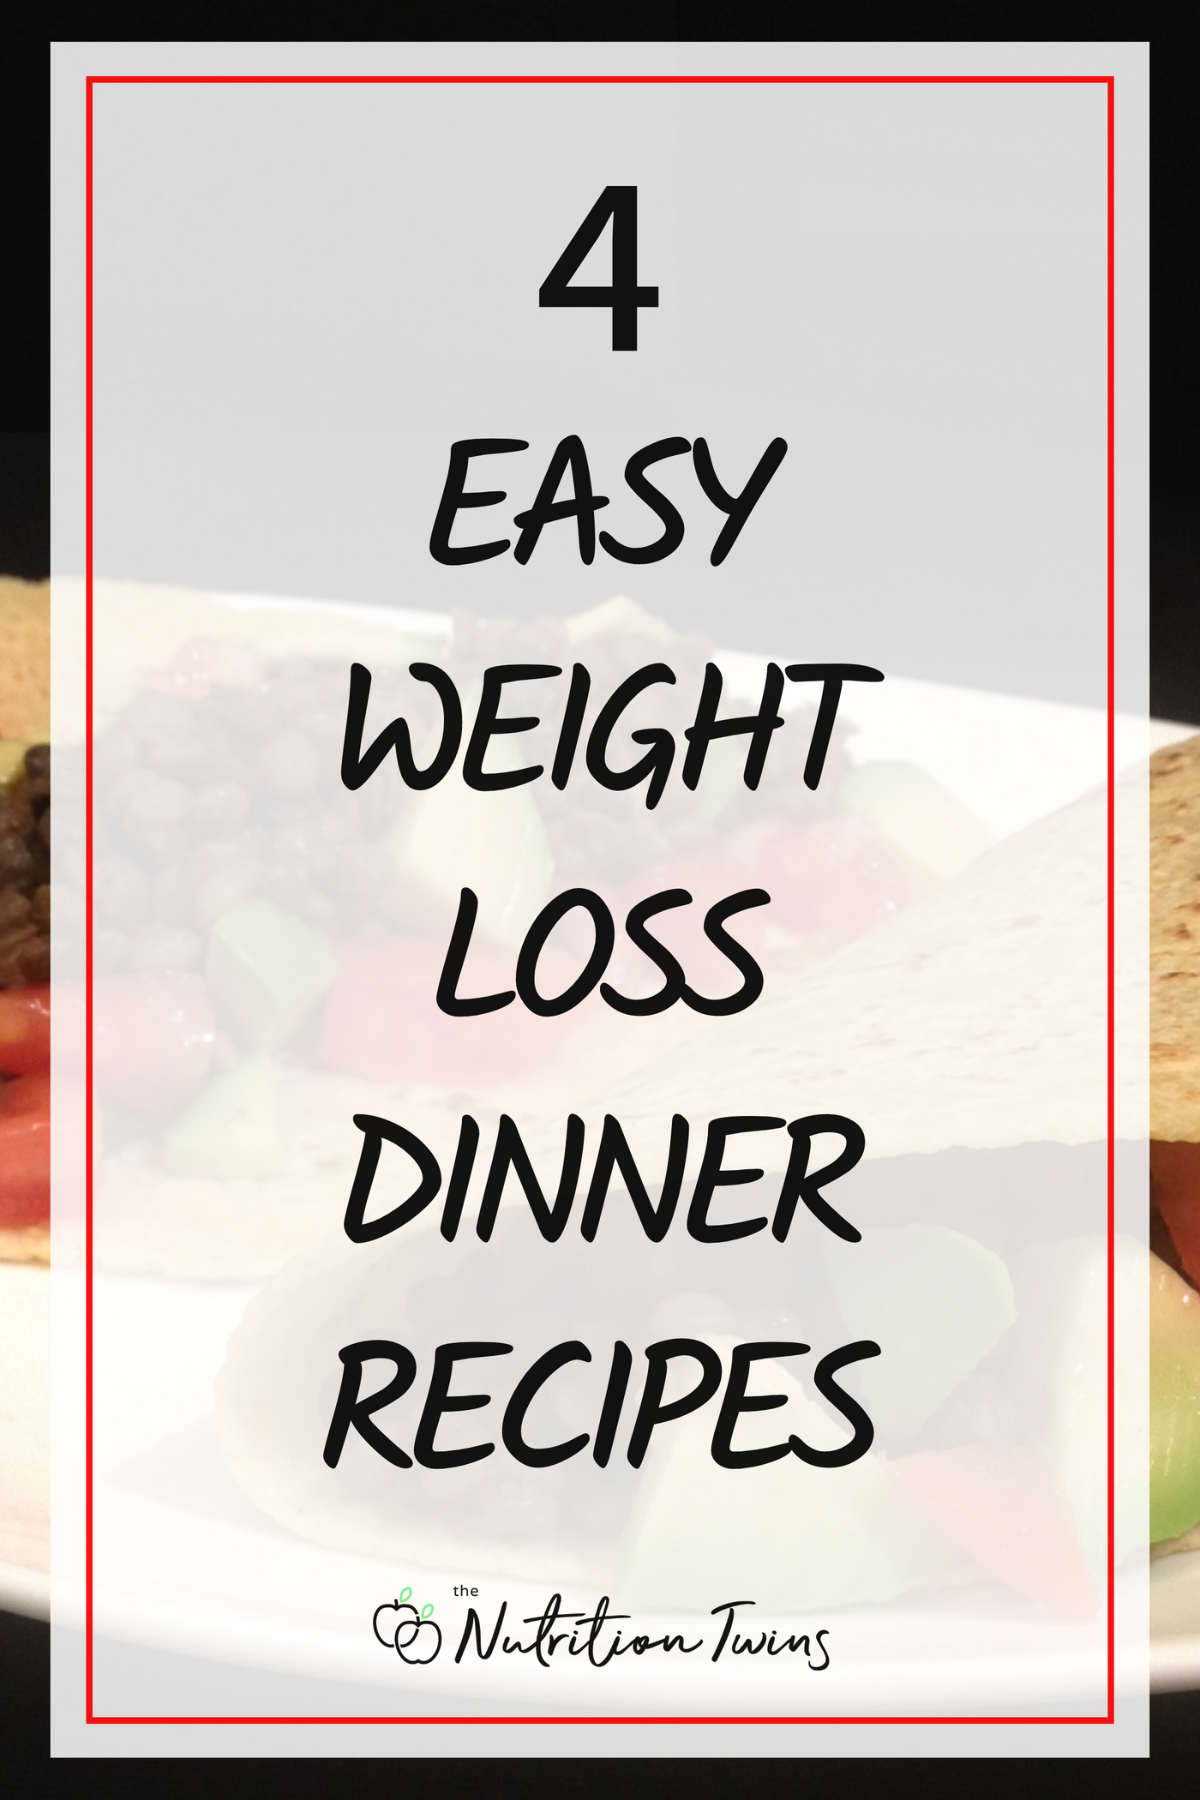 4 Easy Weight Loss Dinner Recipes with vegetarian tacos in the background